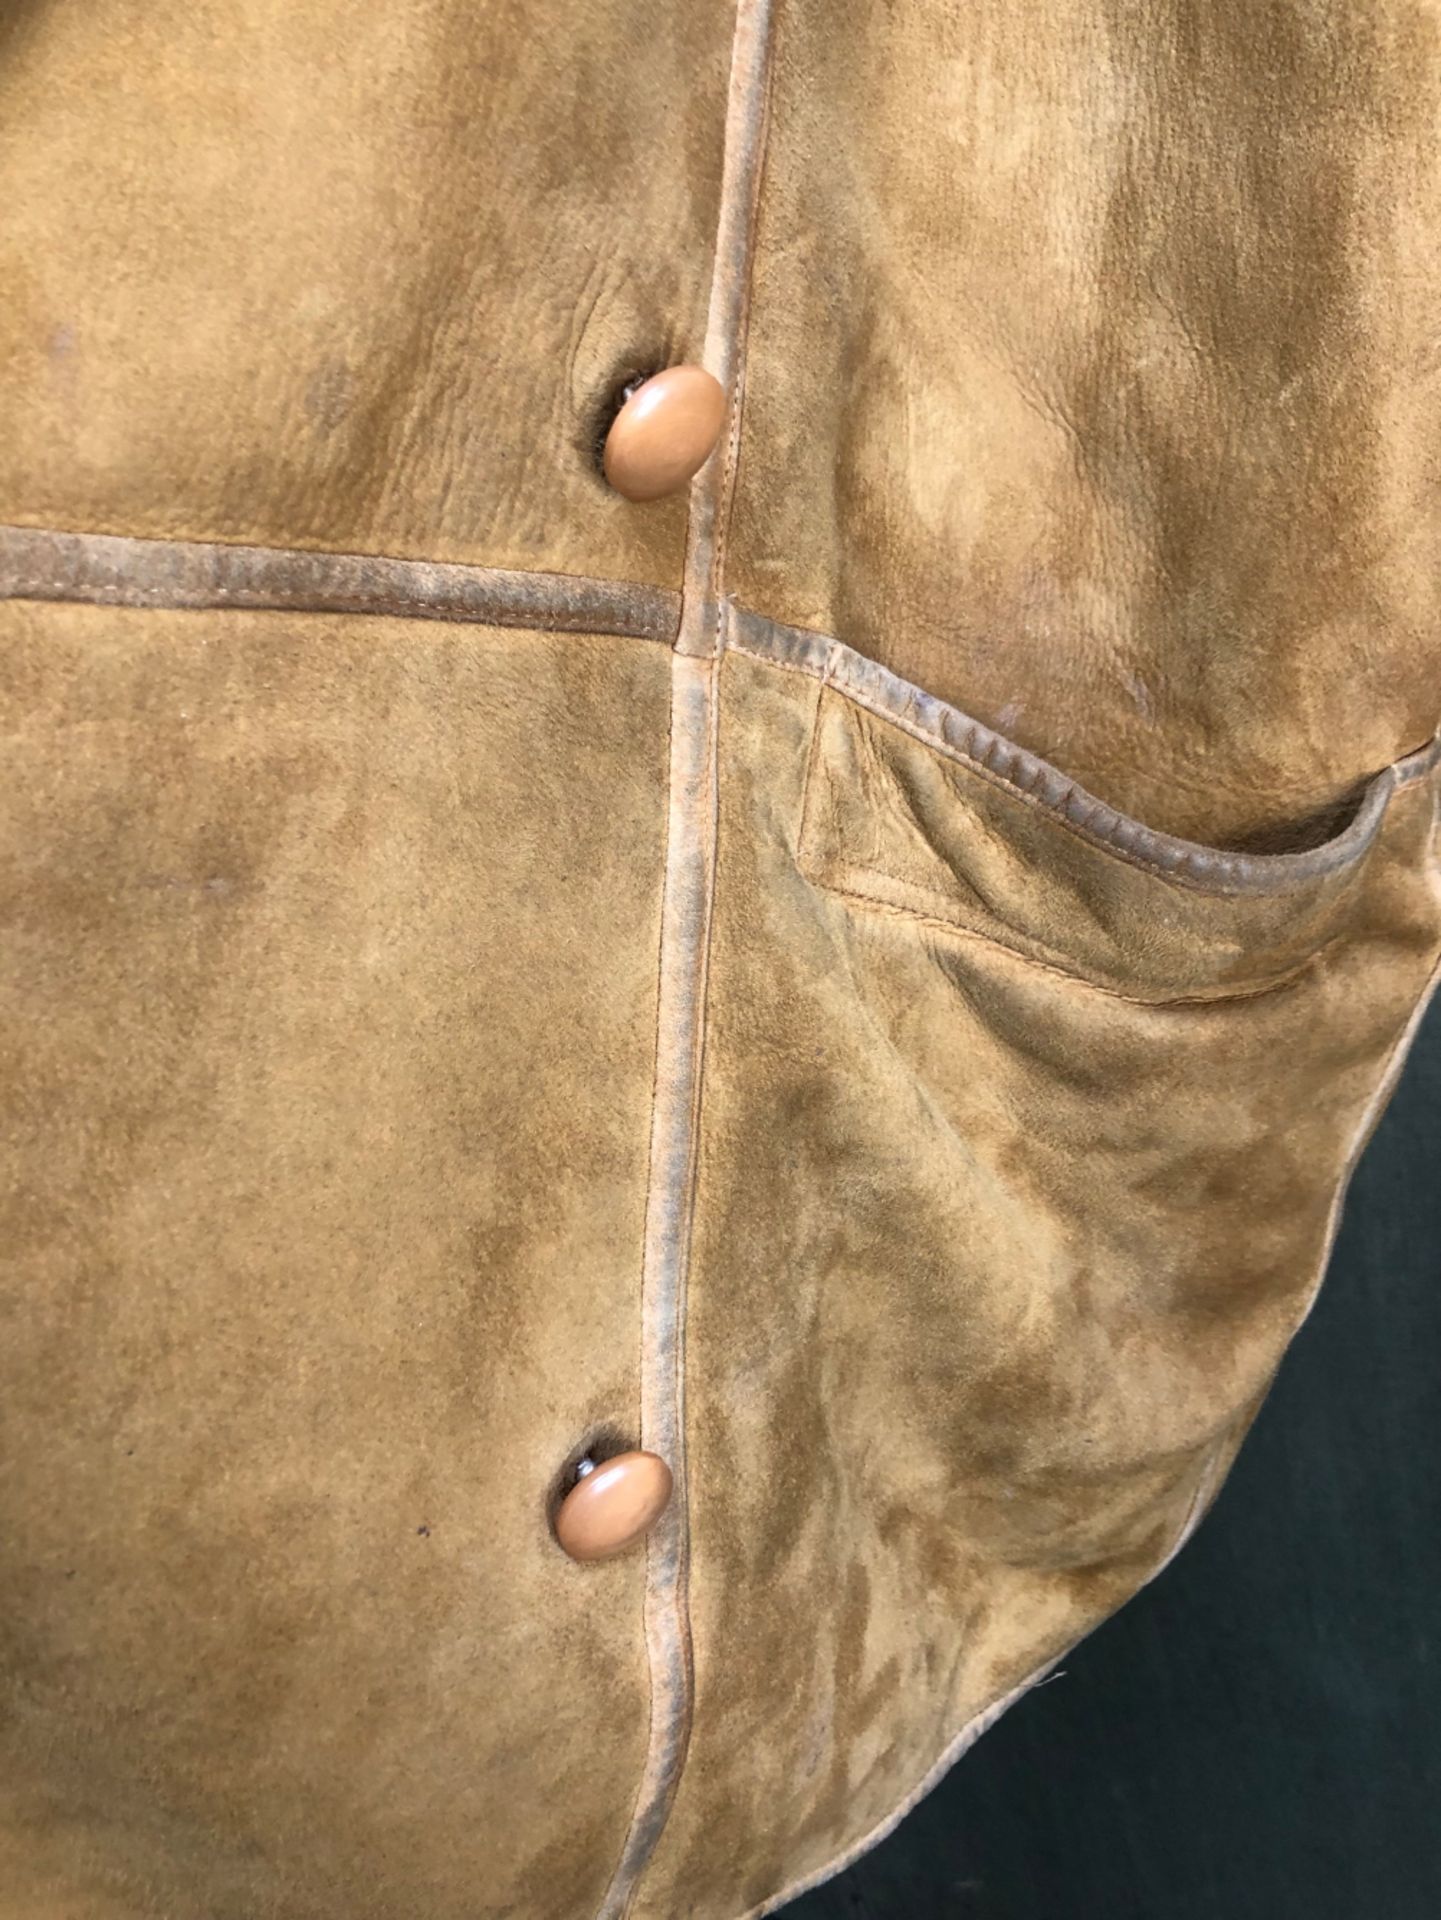 JACKETS: STRIWA 3/4 LENGTH FAWN COLOURED SHEEP SKIN JACKET WITH HOOD SIZE STATED EUR 36, TOGETHER - Bild 17 aus 21